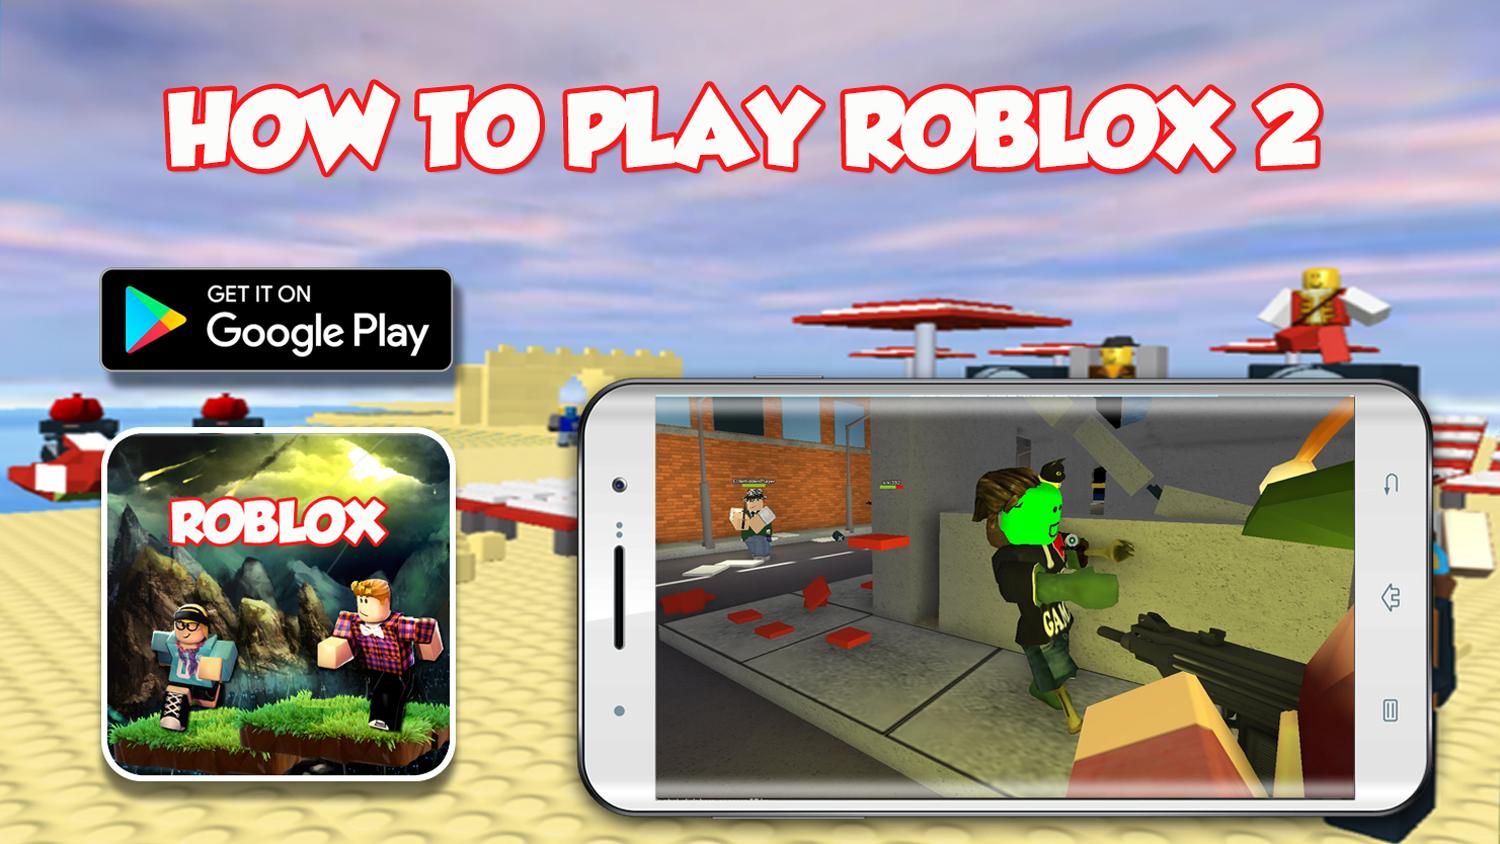 Guide For Roblox 2 Free For Android Apk Download - roblox 2 game free download